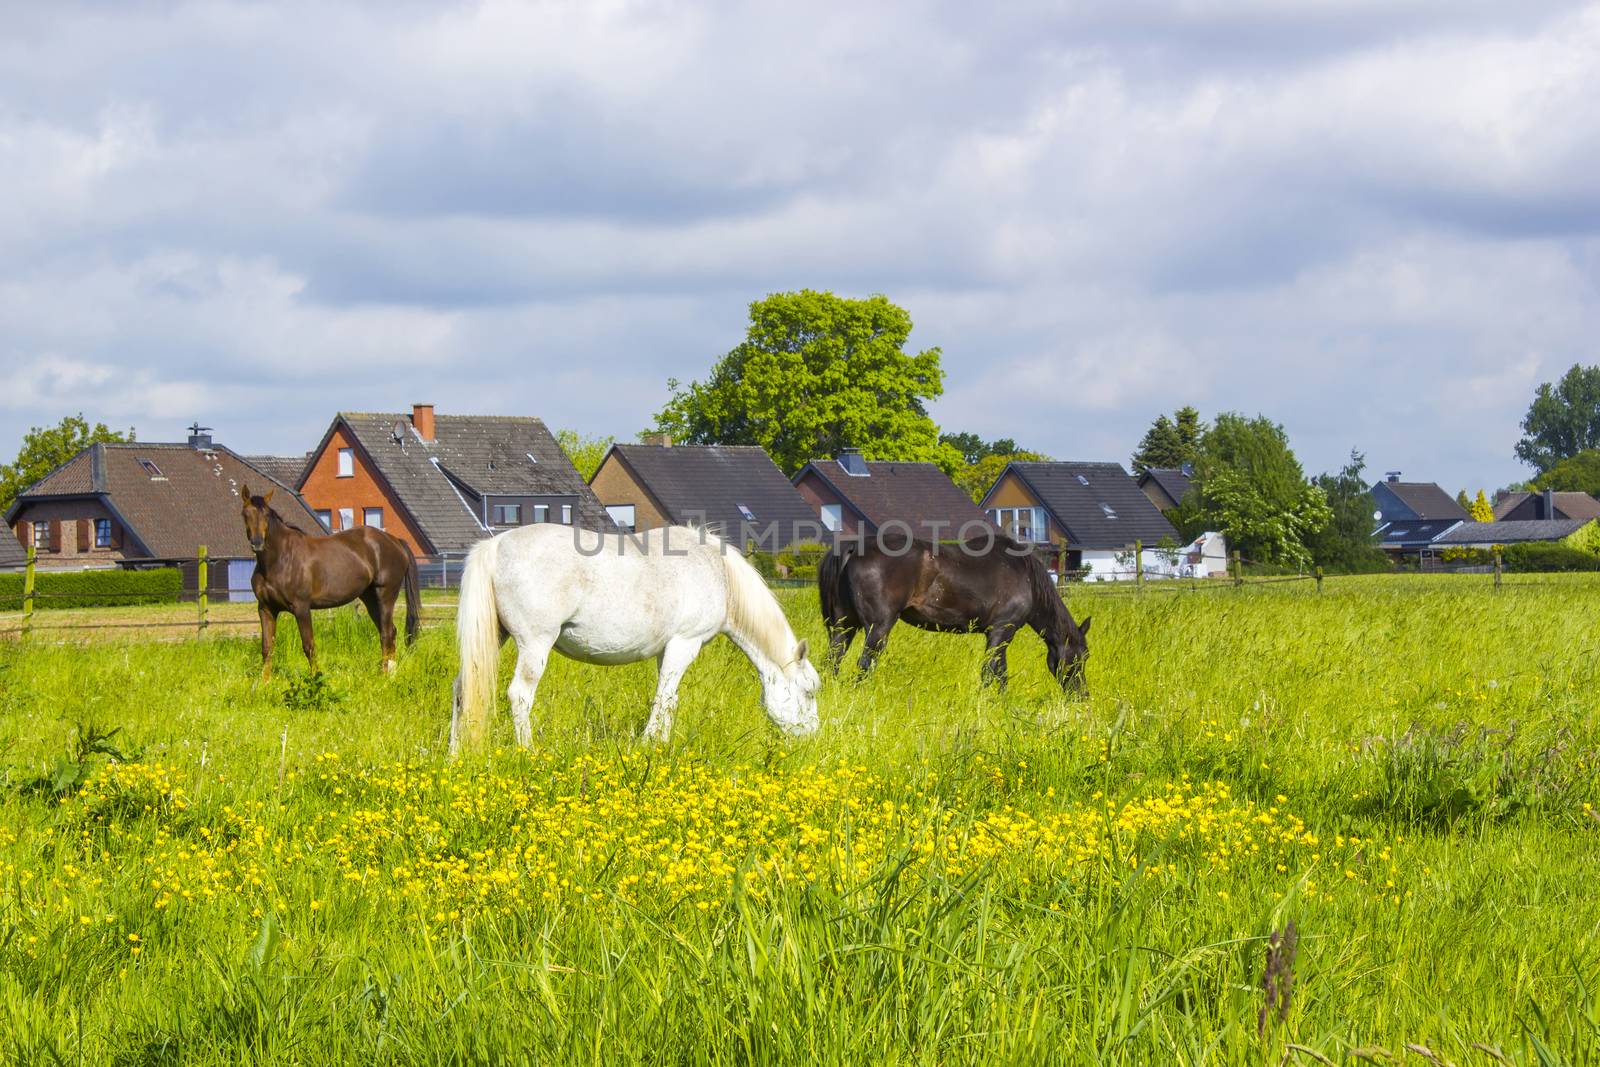 Horses on a spring pasture, german countryside landscape, Lower Rhine Region